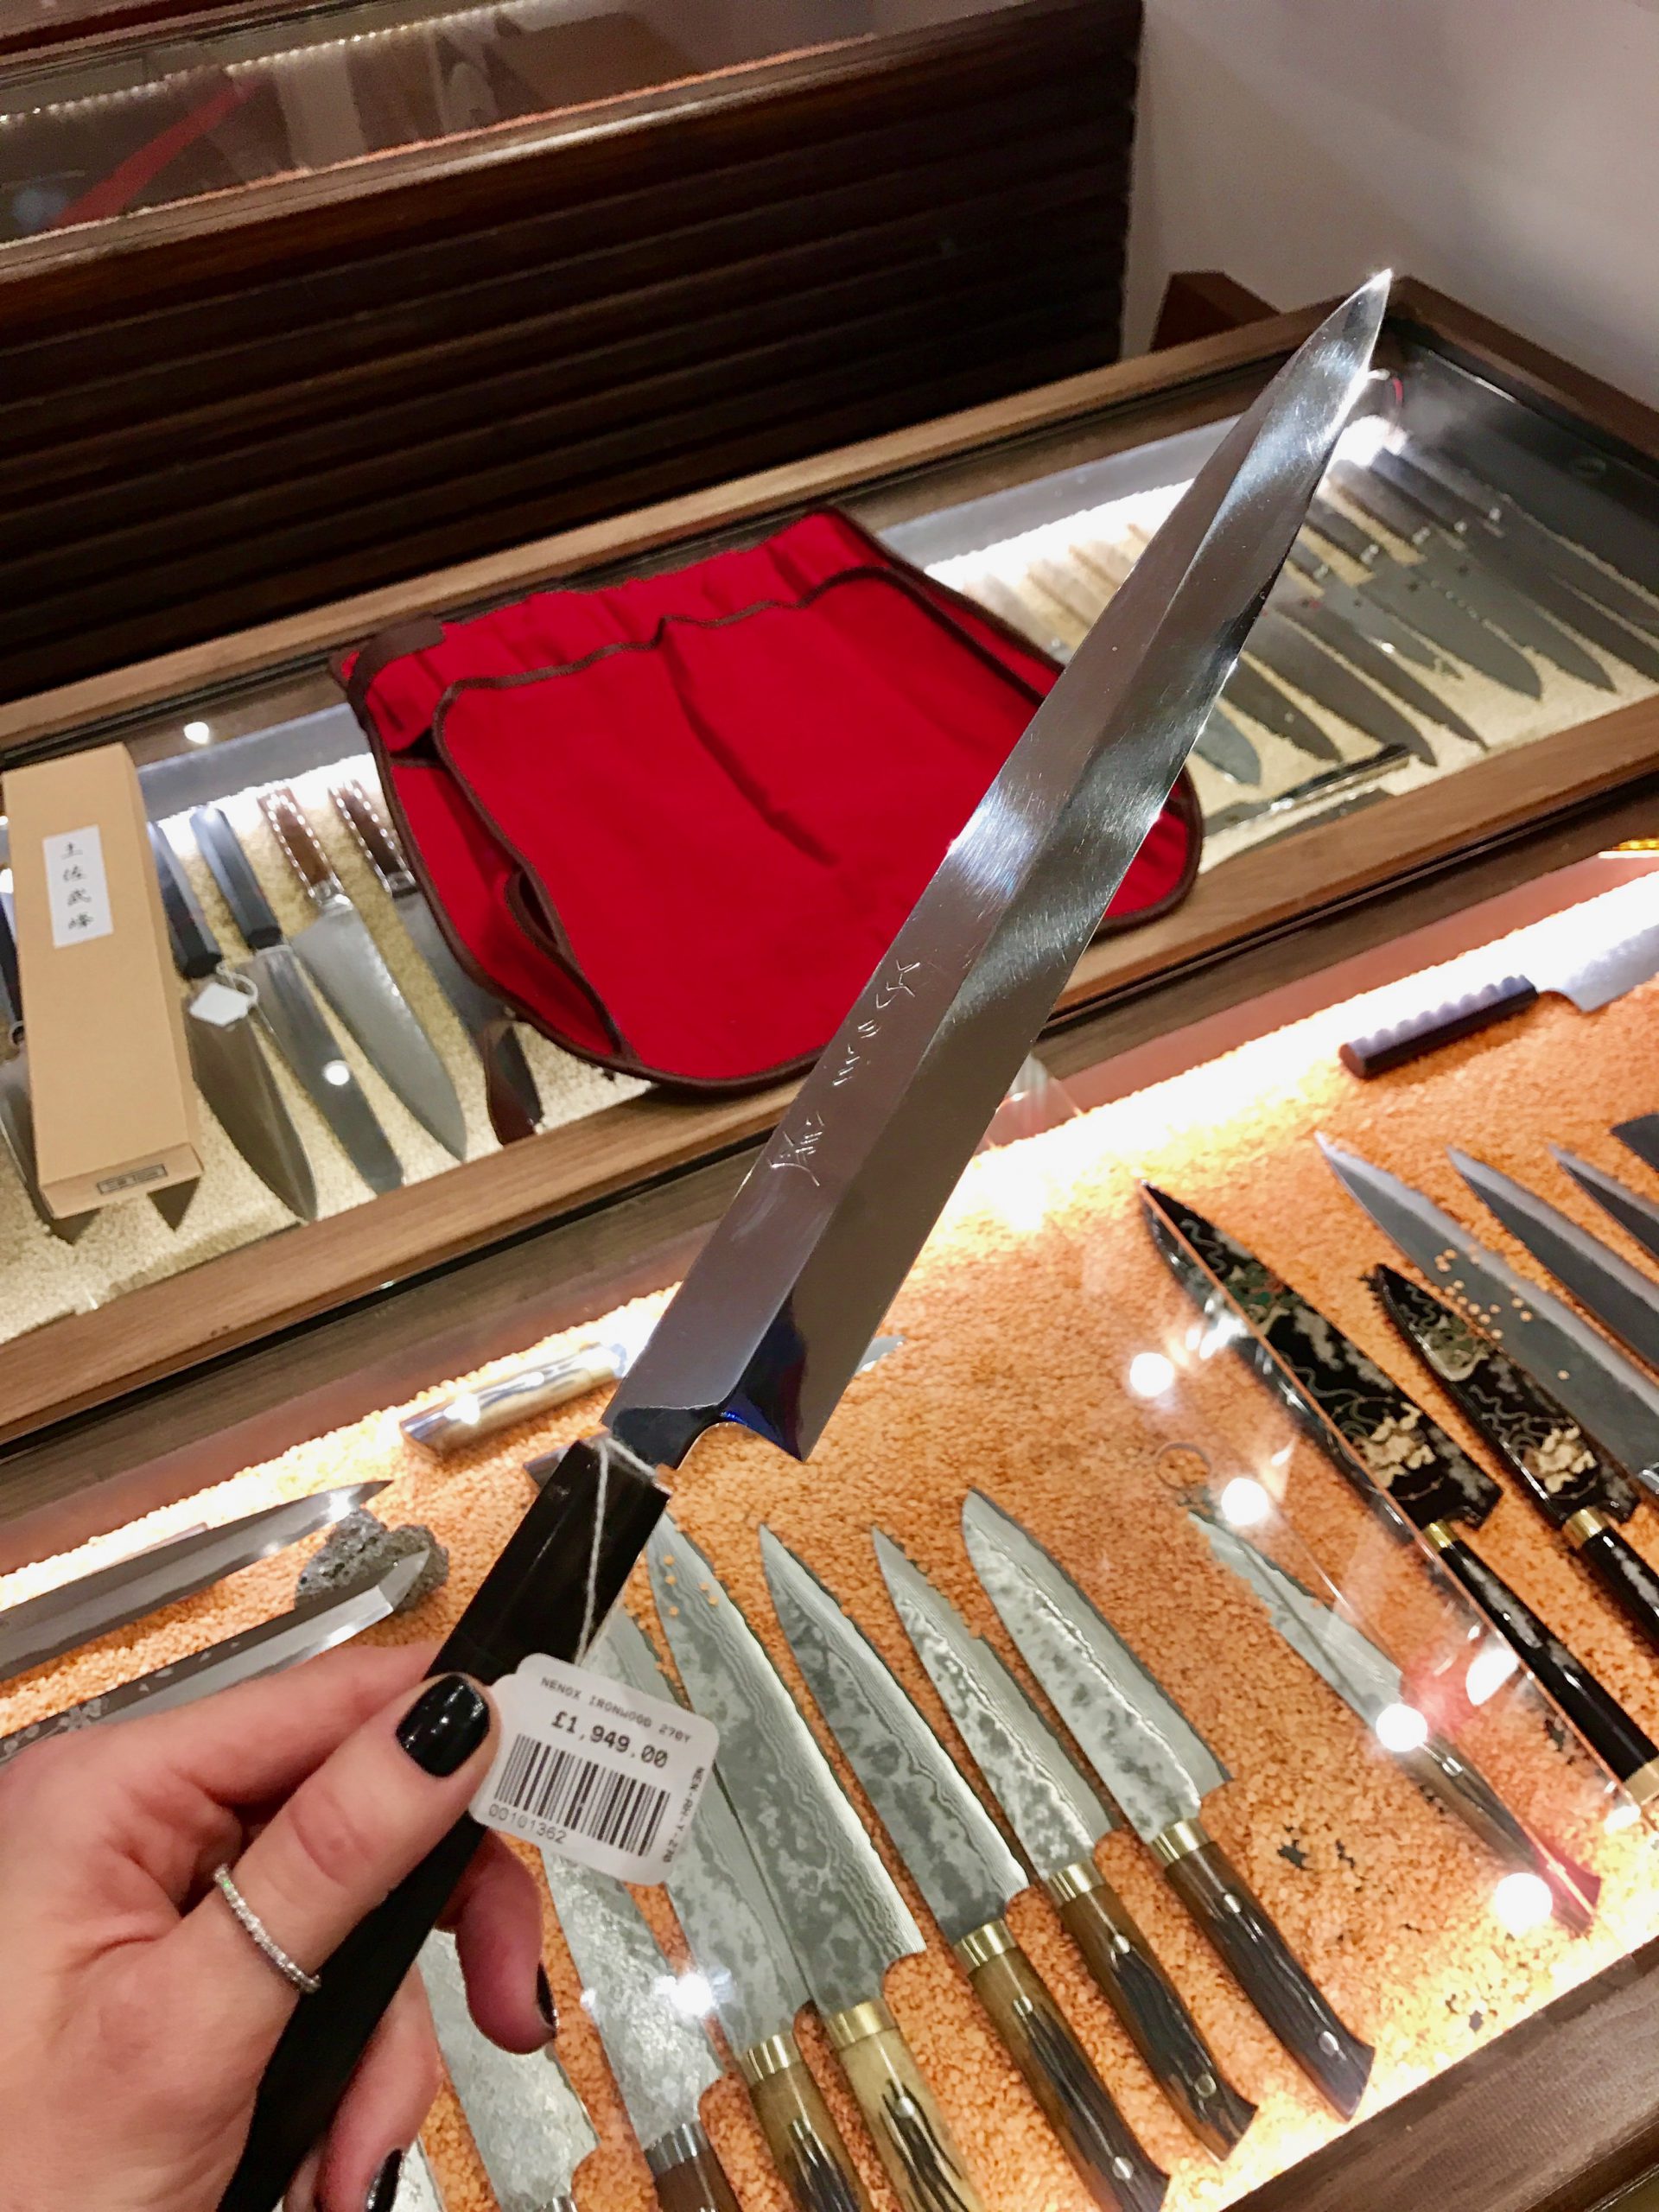 Review of Aikido Knives (2023): Should you buy them?